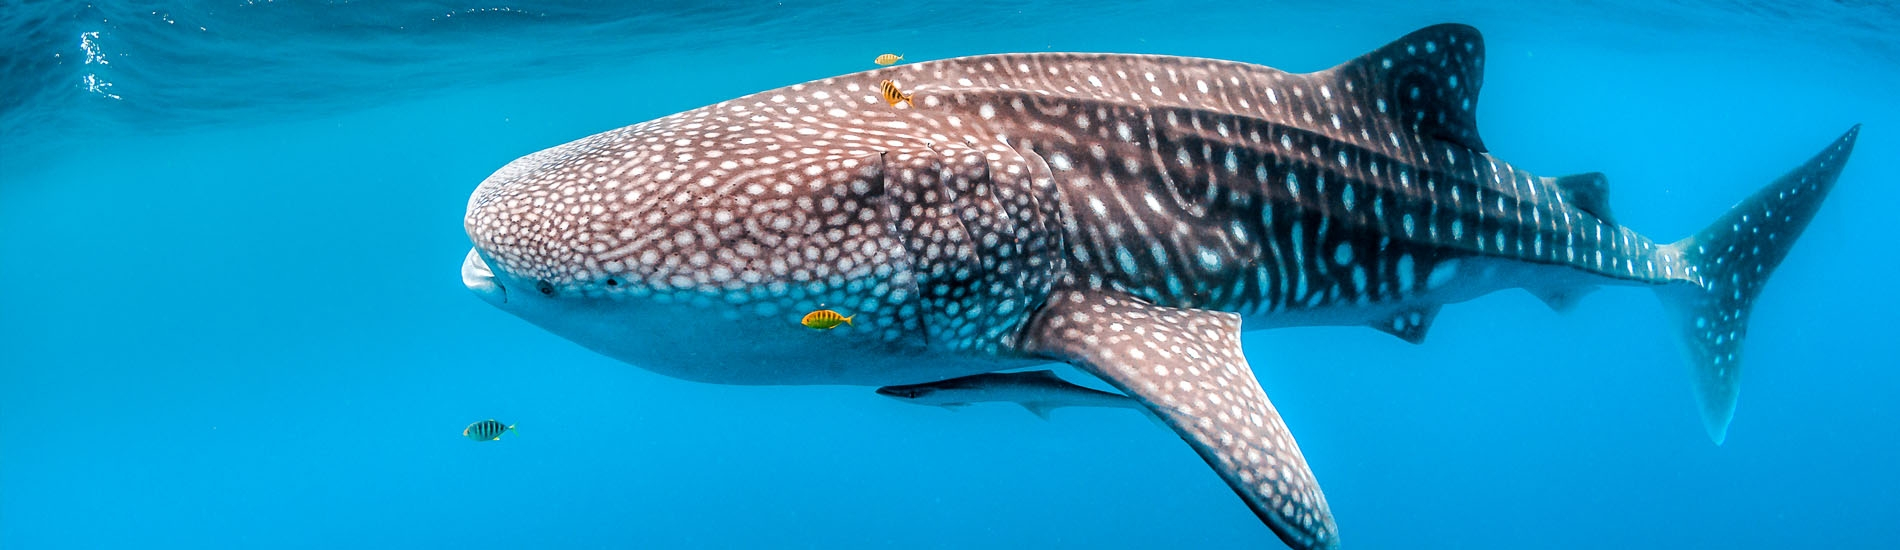 A Glimpse of the Whale Shark in Its Marine Realm